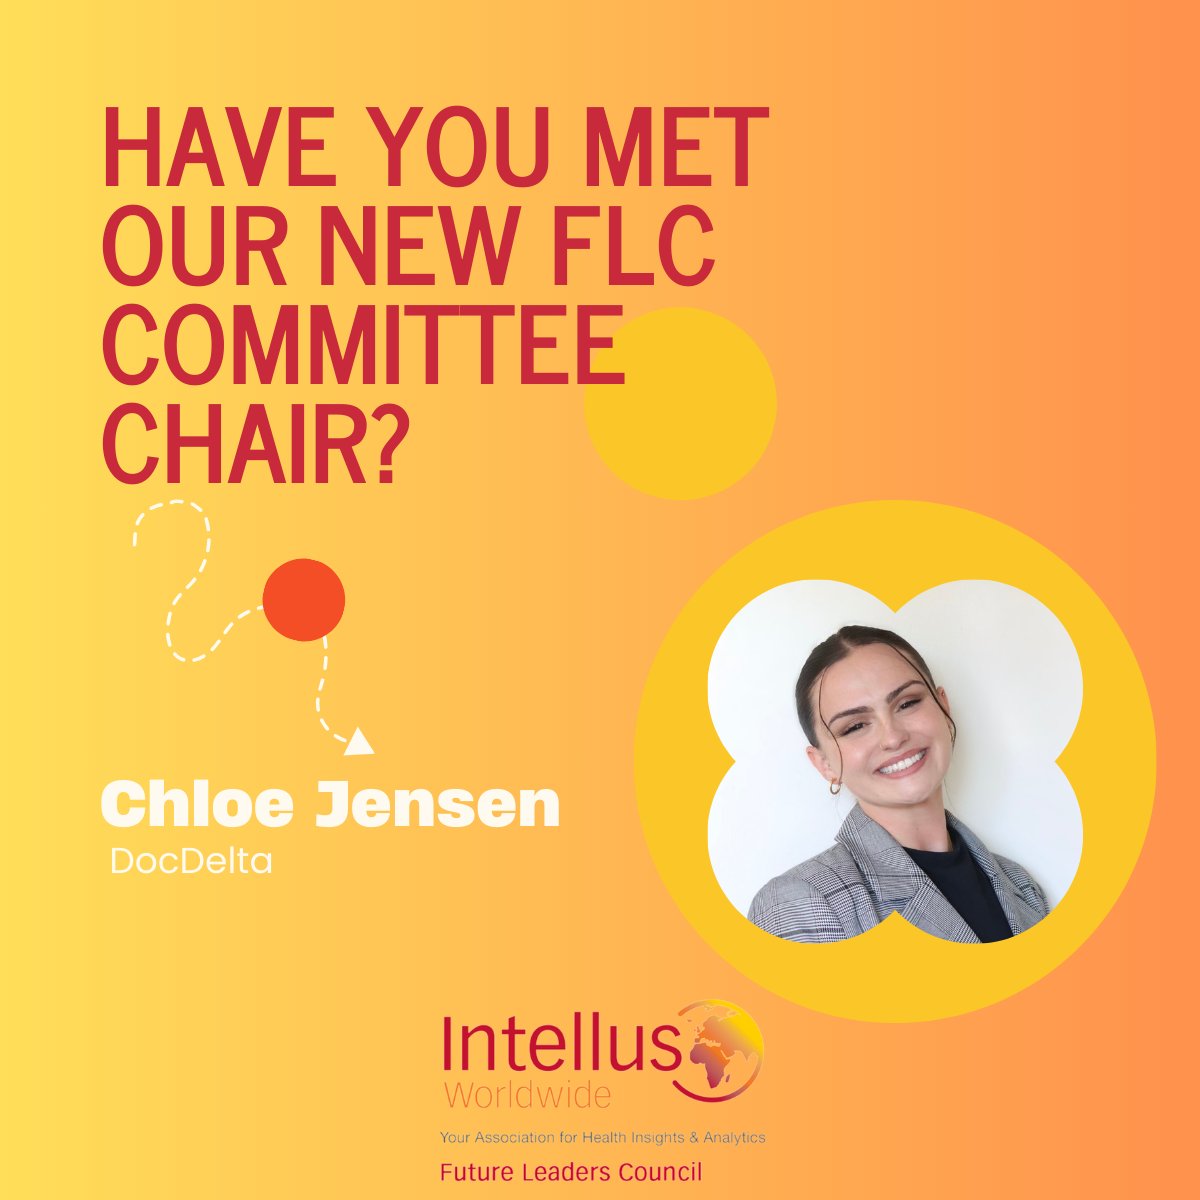 If you're new to the industry or seeking to engage with the Future Leaders Council, reach out to Chloe Jensen at chloe@docdelta.com and explore opportunities for networking and growth.   #Intellus2024 #HealthcareInsights #YoungProfessionals #FutureLeadersCouncil